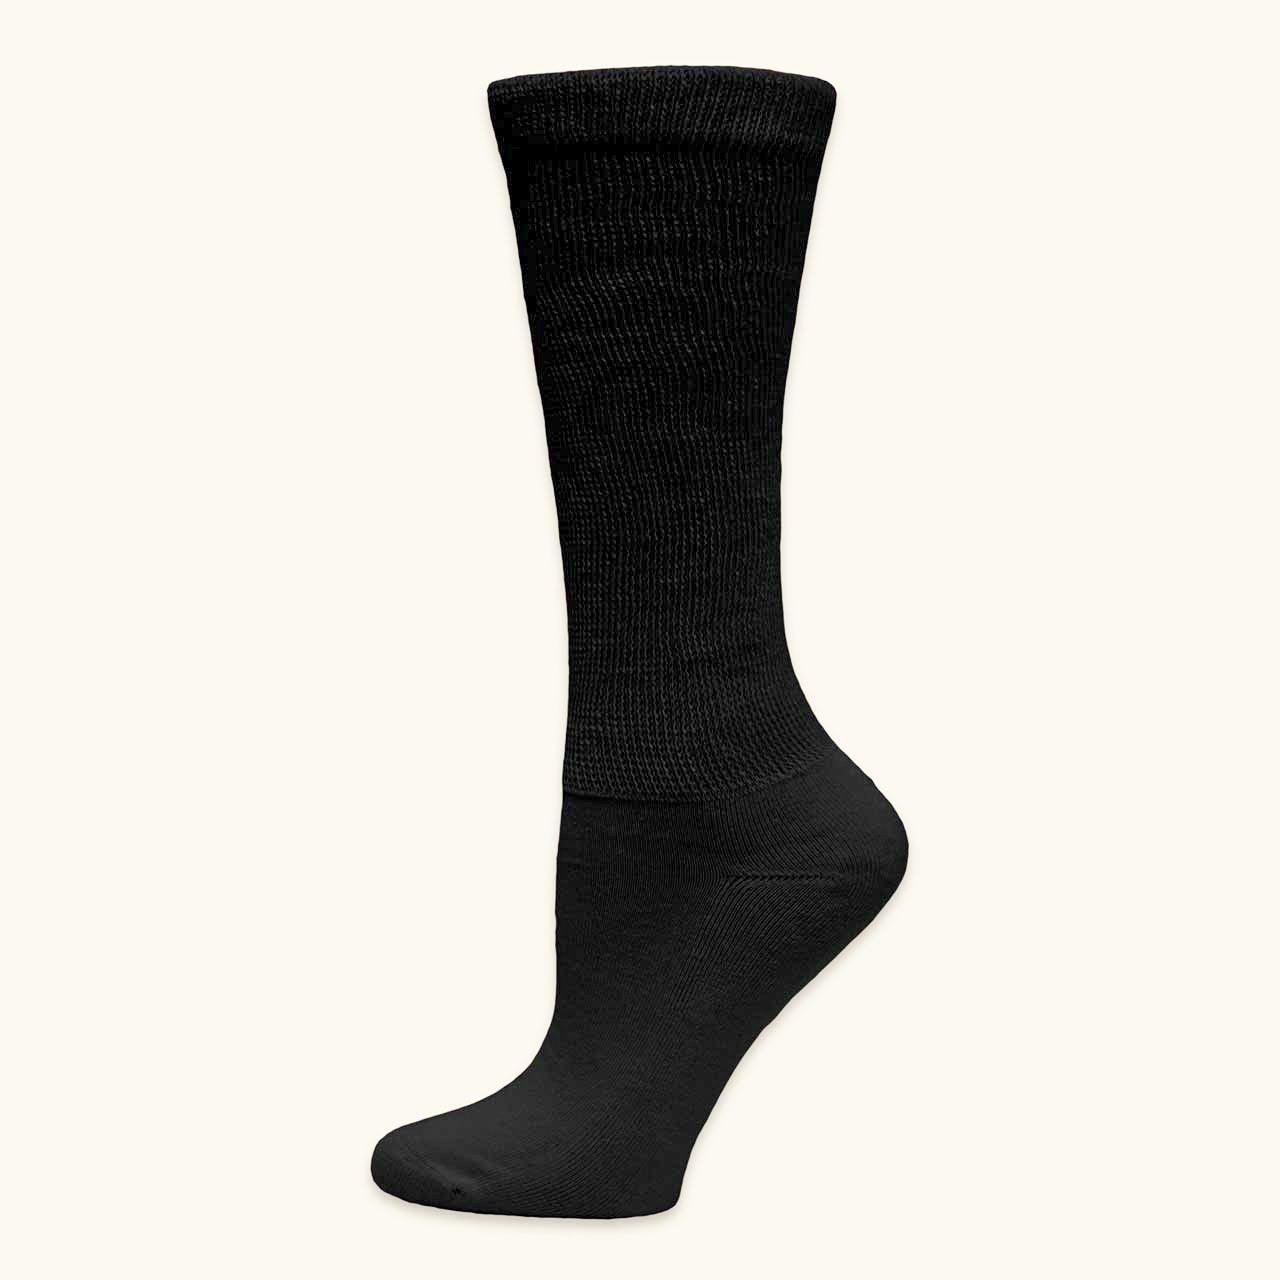 Diabetic Friendly, 89% Organic Cotton, Relaxed Fit Crew - Maggie's Organics - The Sock Monster